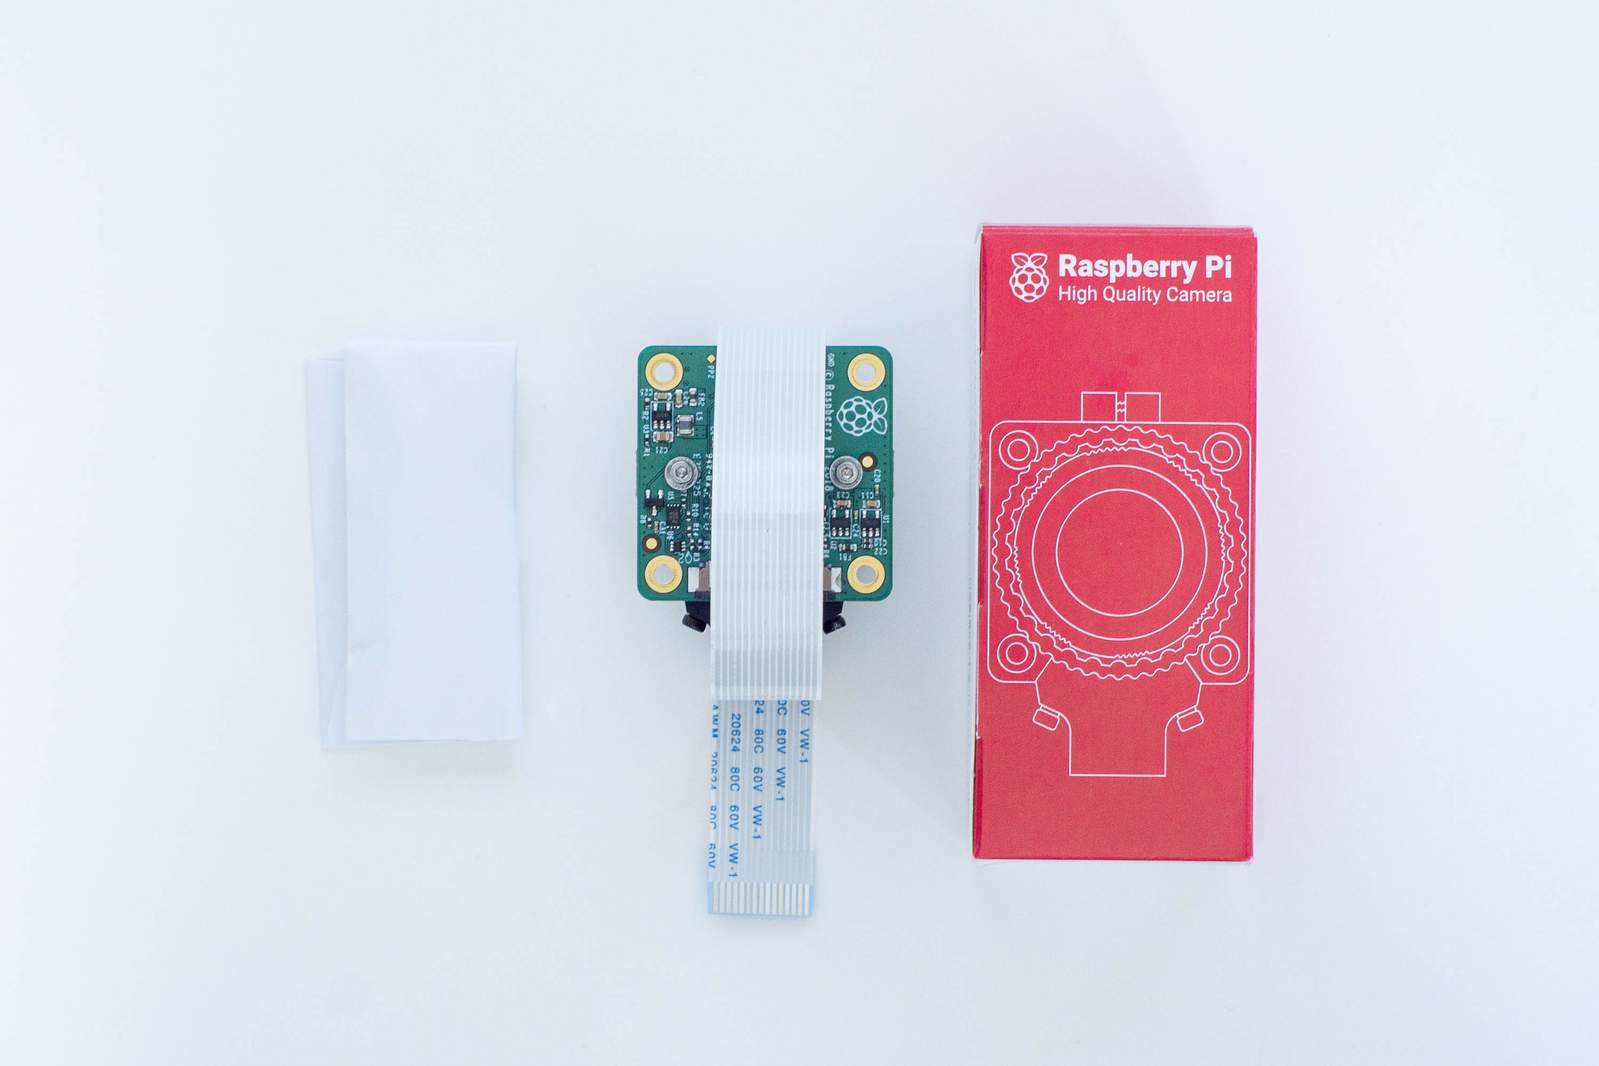 Camera Module packaging contents